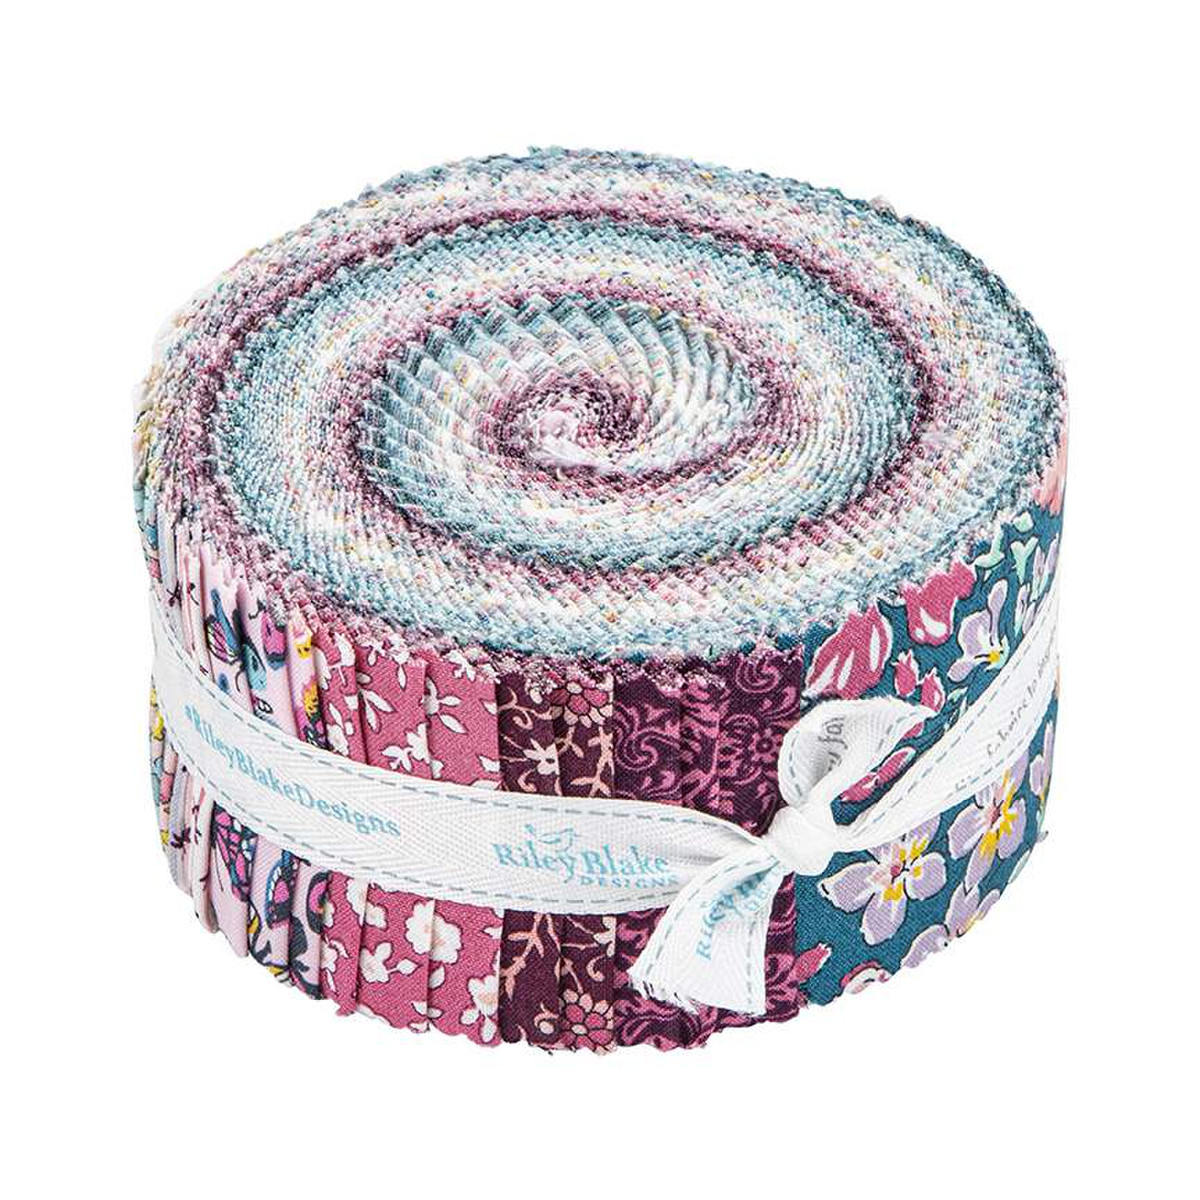 Riley Blake Jelly Roll - Liberty The Collector's Home Nature's Jewel by Liberty Fabrics